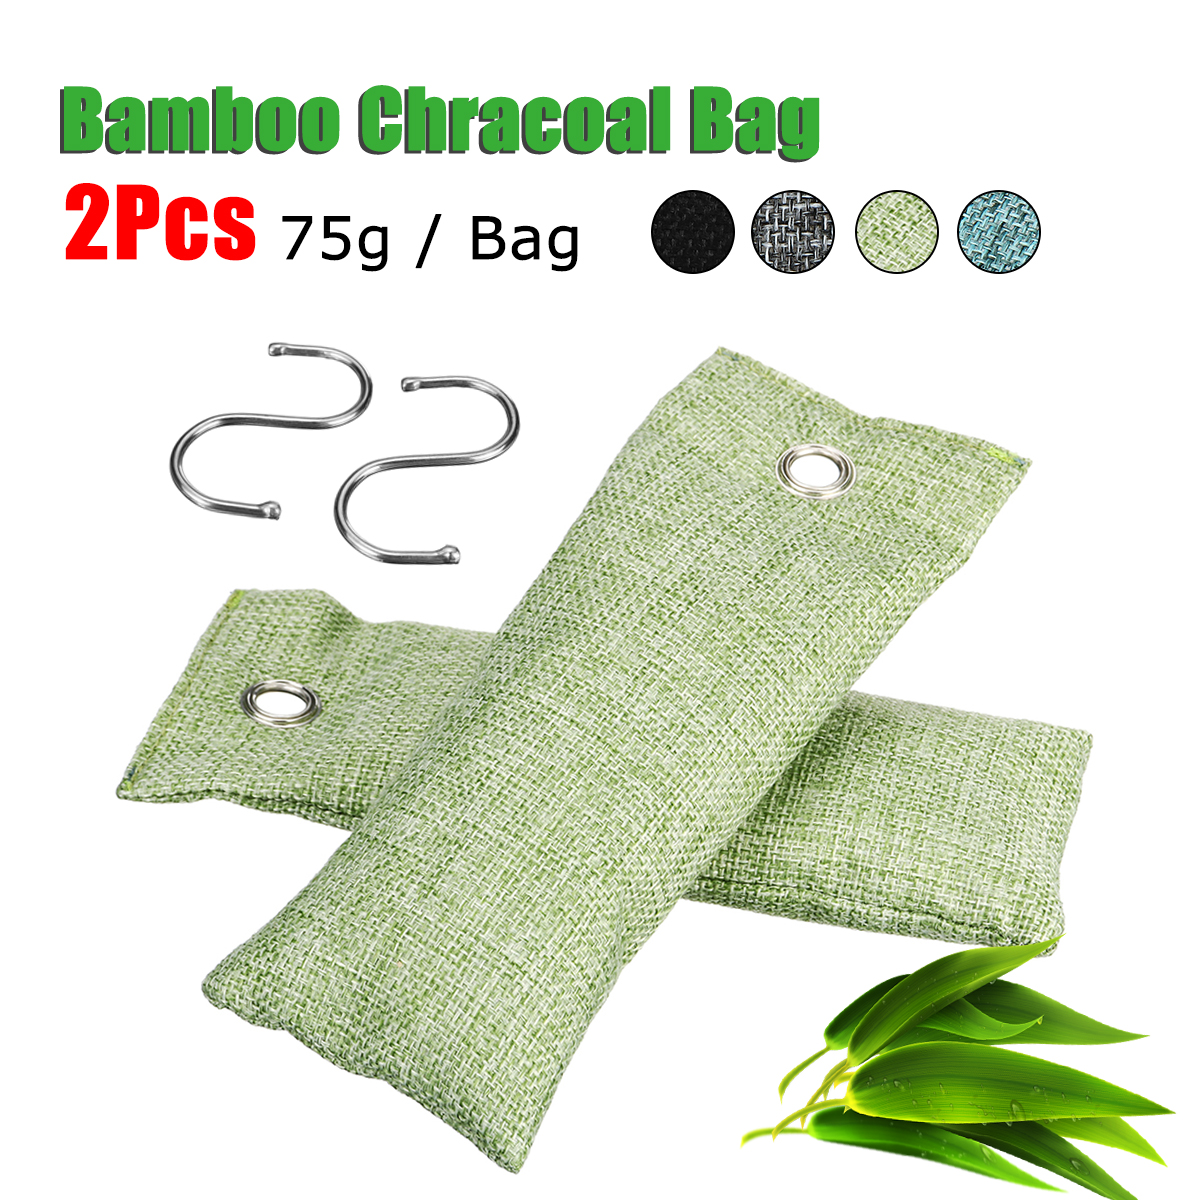 2x-Air-Purifier-Bag-Bamboo-Charcoal-Fresher-Shoes-Mold-Odor-Remover-House-Car-Purifying-Bag-1627507-3